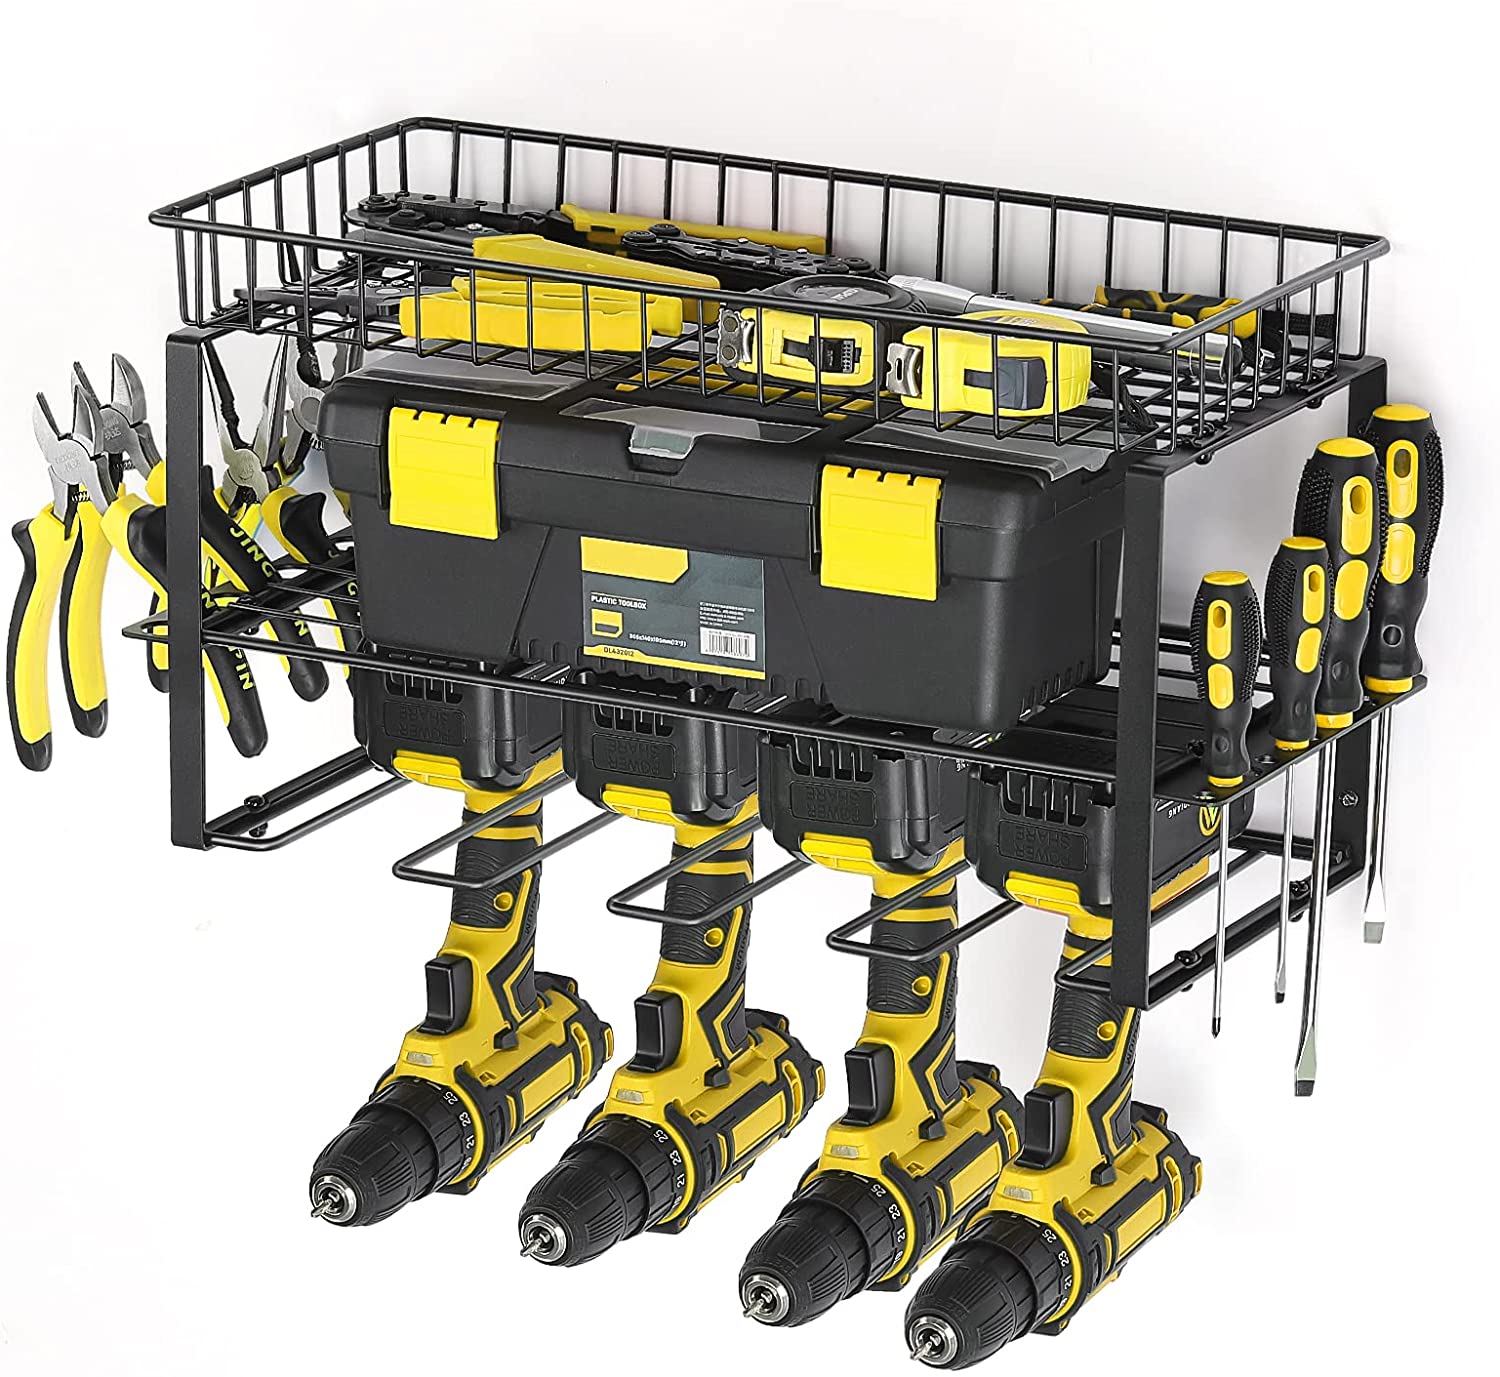 Utility Storage Rack for Cordless Drill